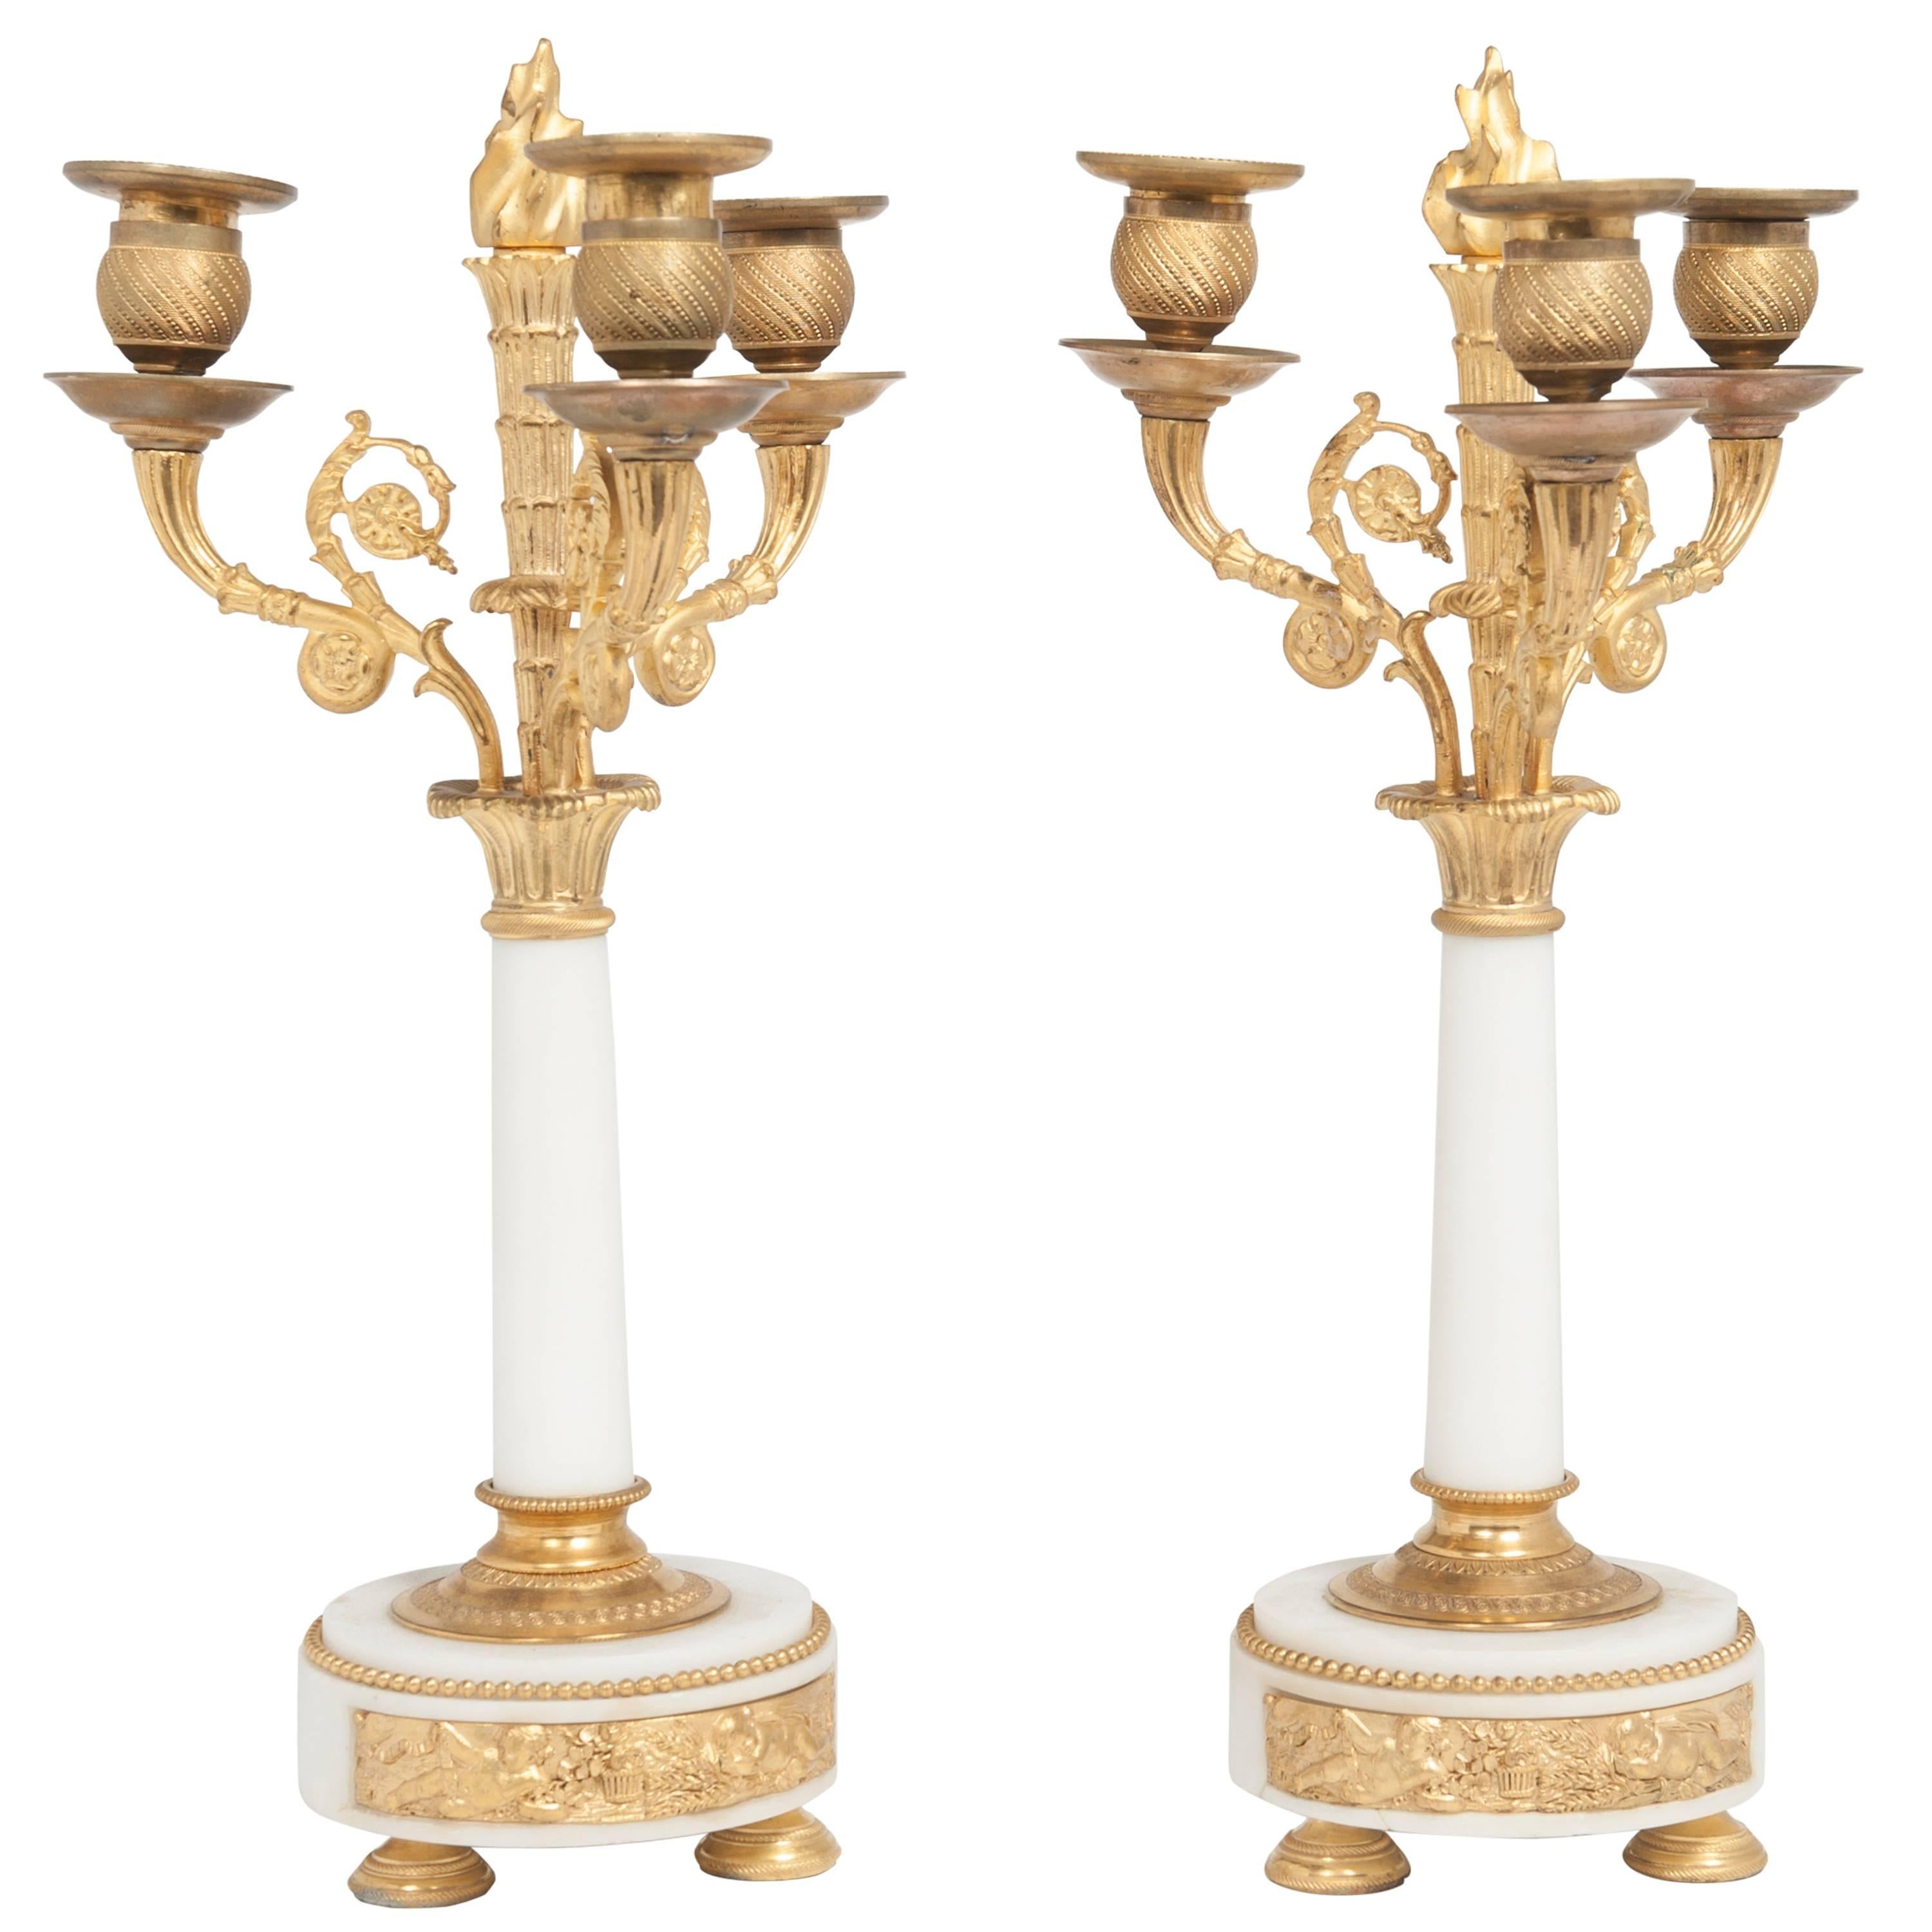 Nice Pair of Decorative 19th Century Louis XVI Inspired Candlesticks, circa 1860 For Sale